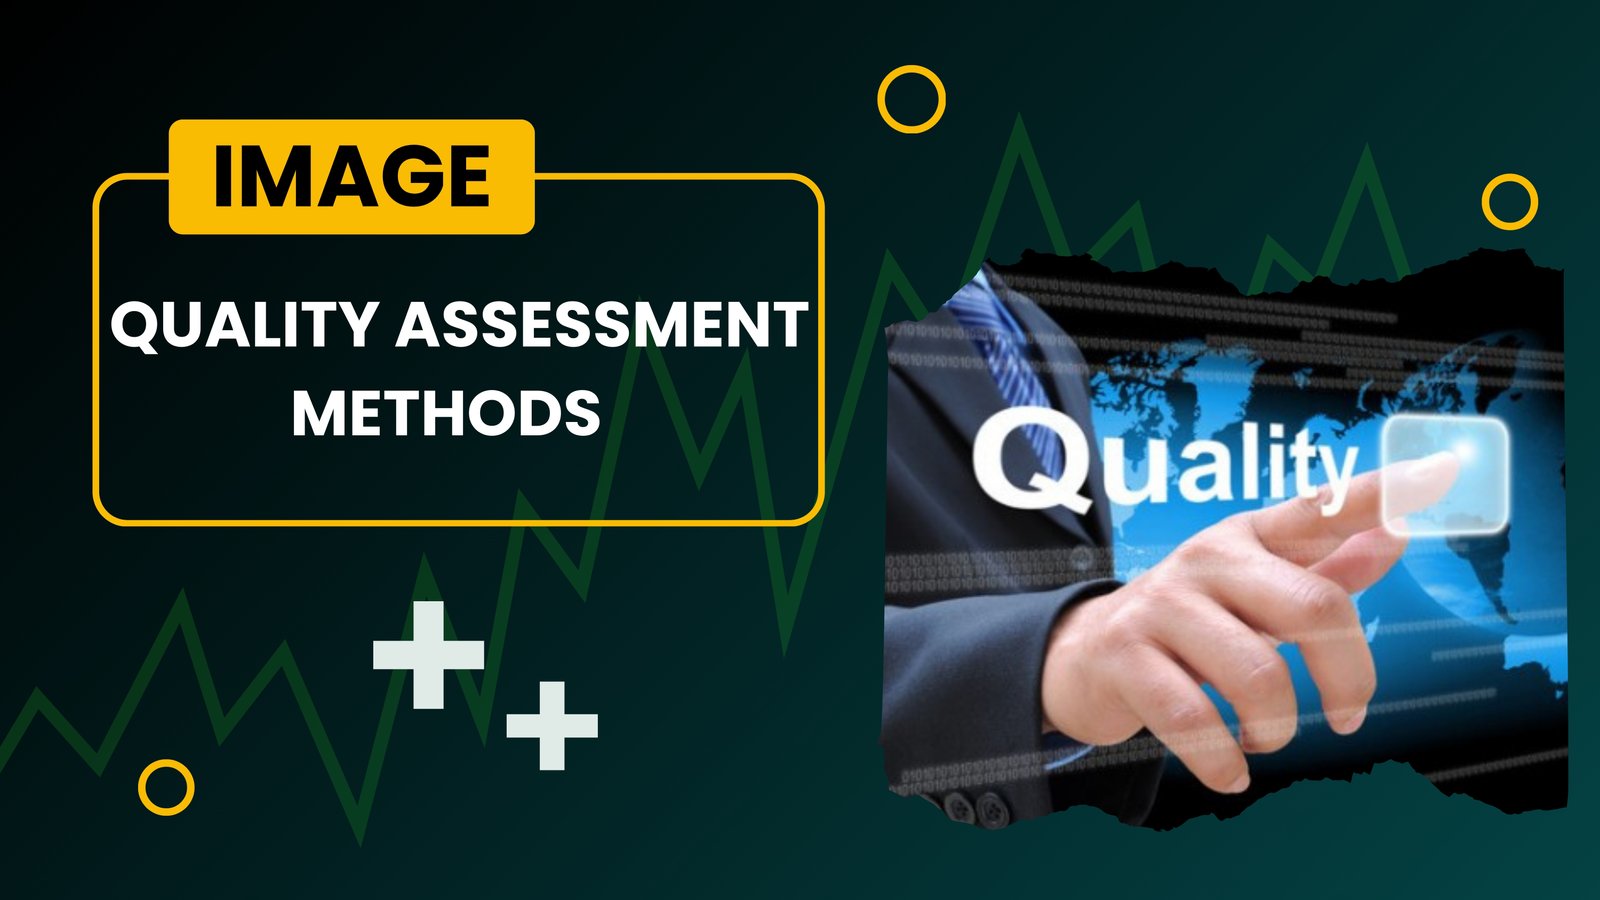 Image Quality Assessment Methods - An Overview